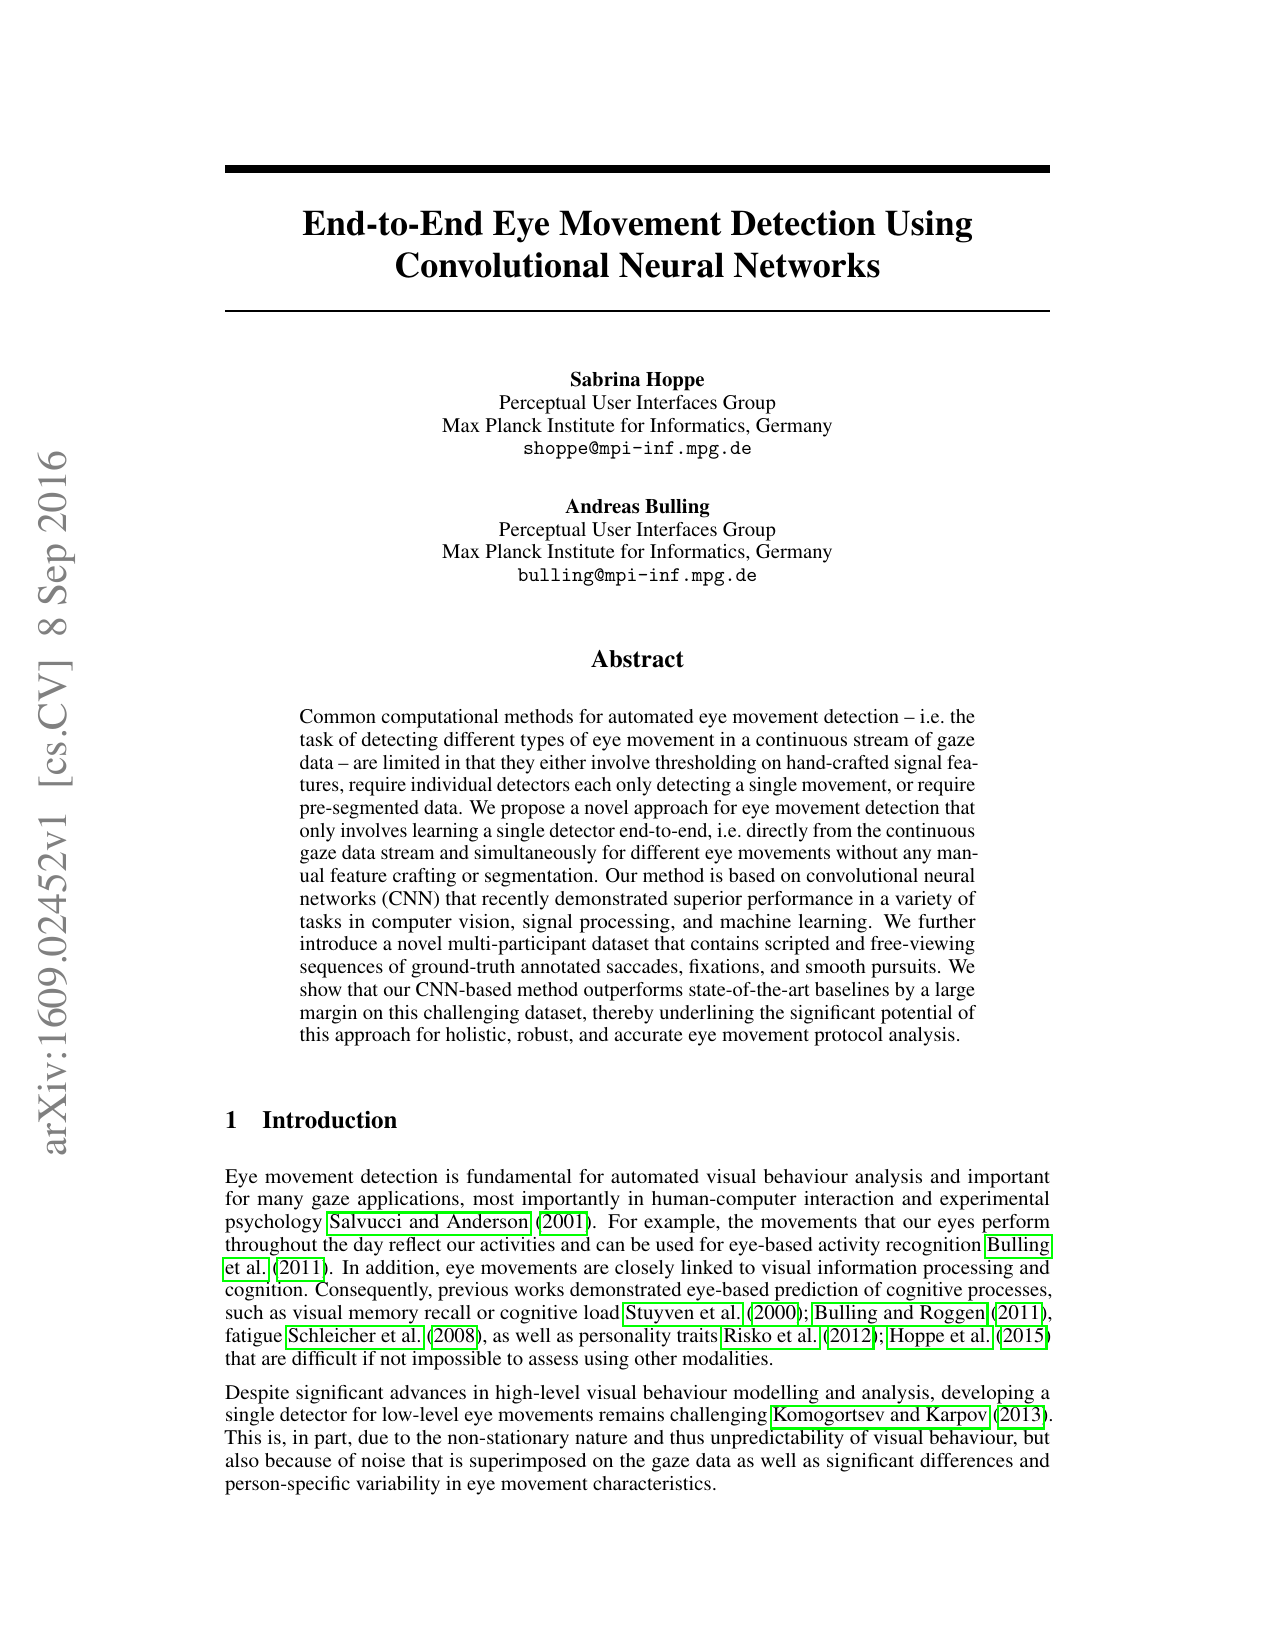 End-to-End Eye Movement Detection Using Convolutional Neural Networks